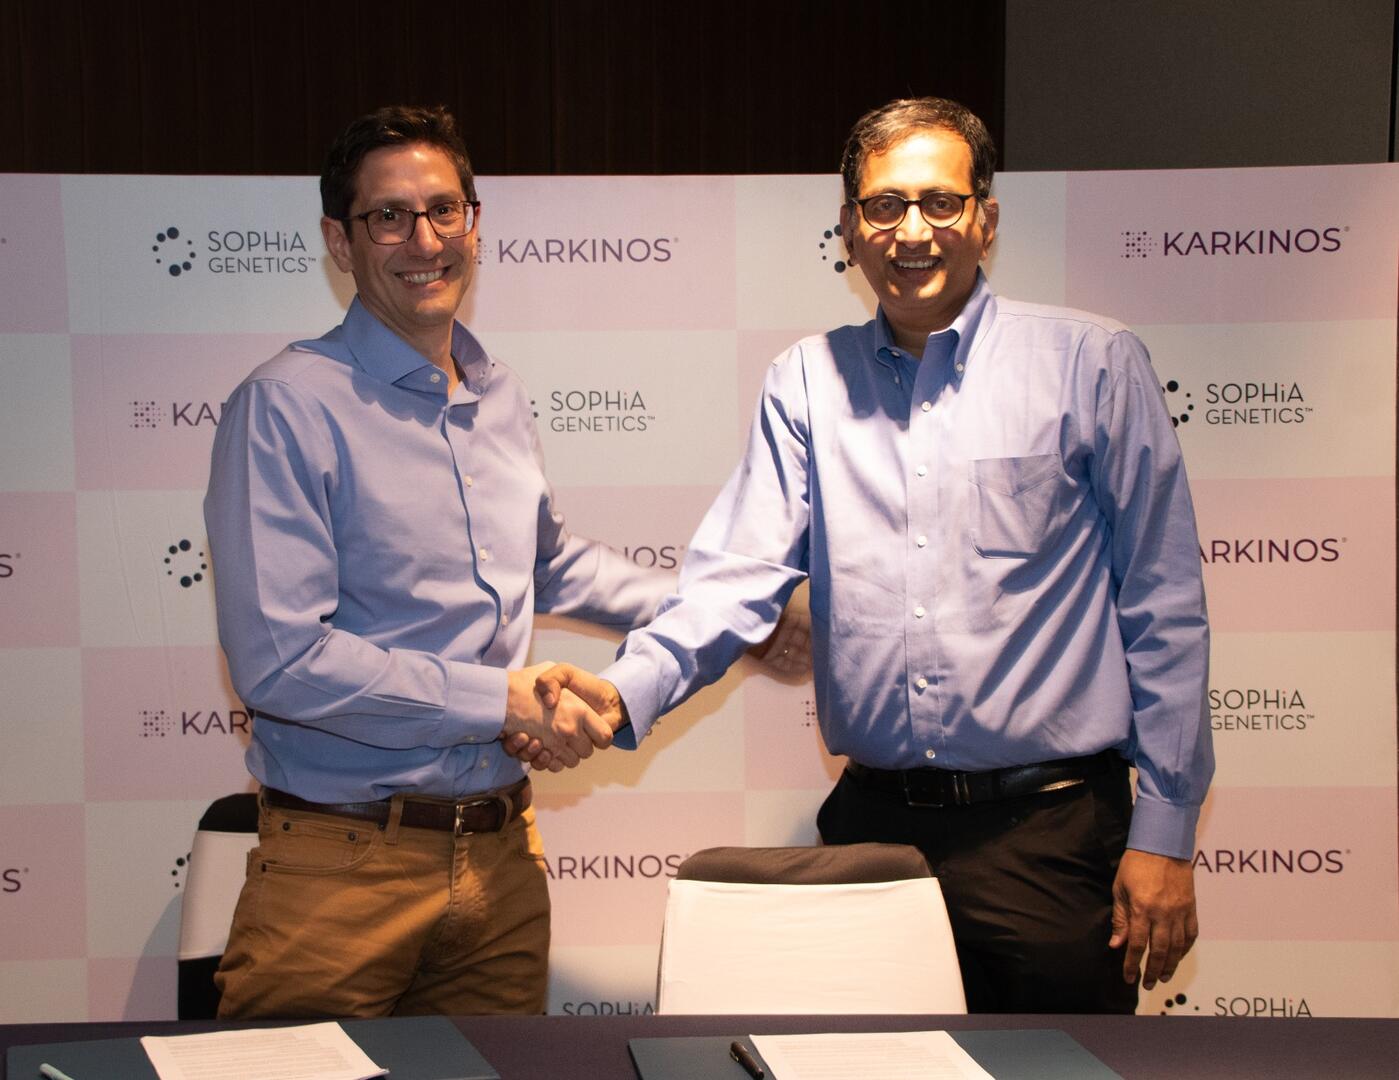 Karkinos Healthcare and SOPHiA GENETICS join hands for Research in Genomic Solutions for Cancer